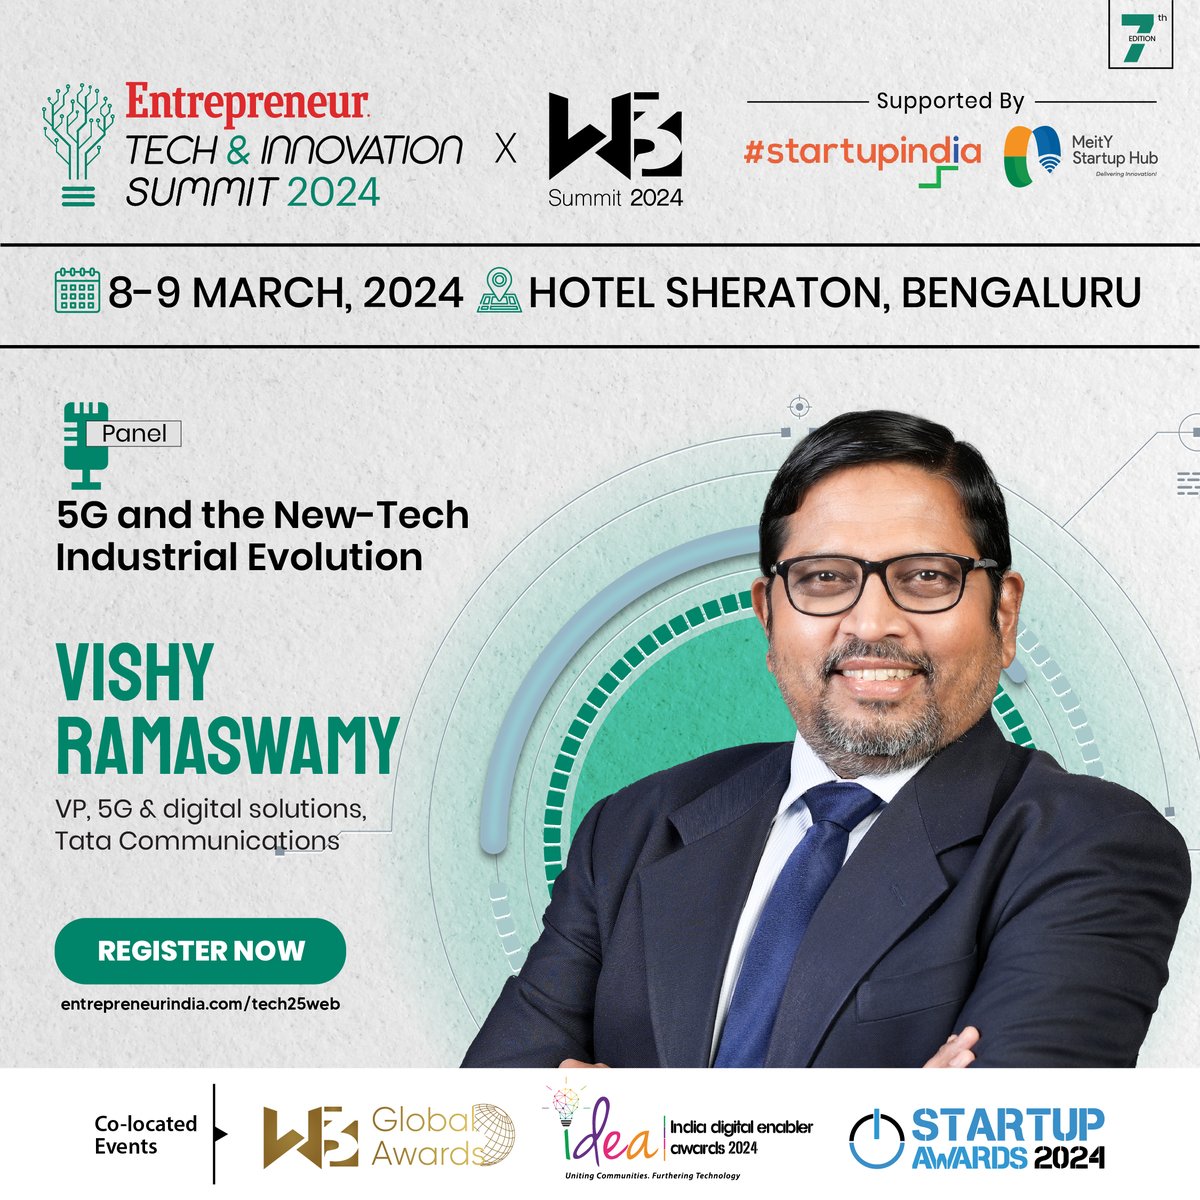 Excited to introduce Vishy Ramaswamy, VP of 5G and Digital Solutions at Tata Communications, as a panelist!

Secure your spot now!

📅 08-09 March 2024 📅 , Hotel Sheraton, Bengaluru

Register Now- ow.ly/Bzoz50QH5oJ

#TechInnovationSummit   #EntrepreneurIndia